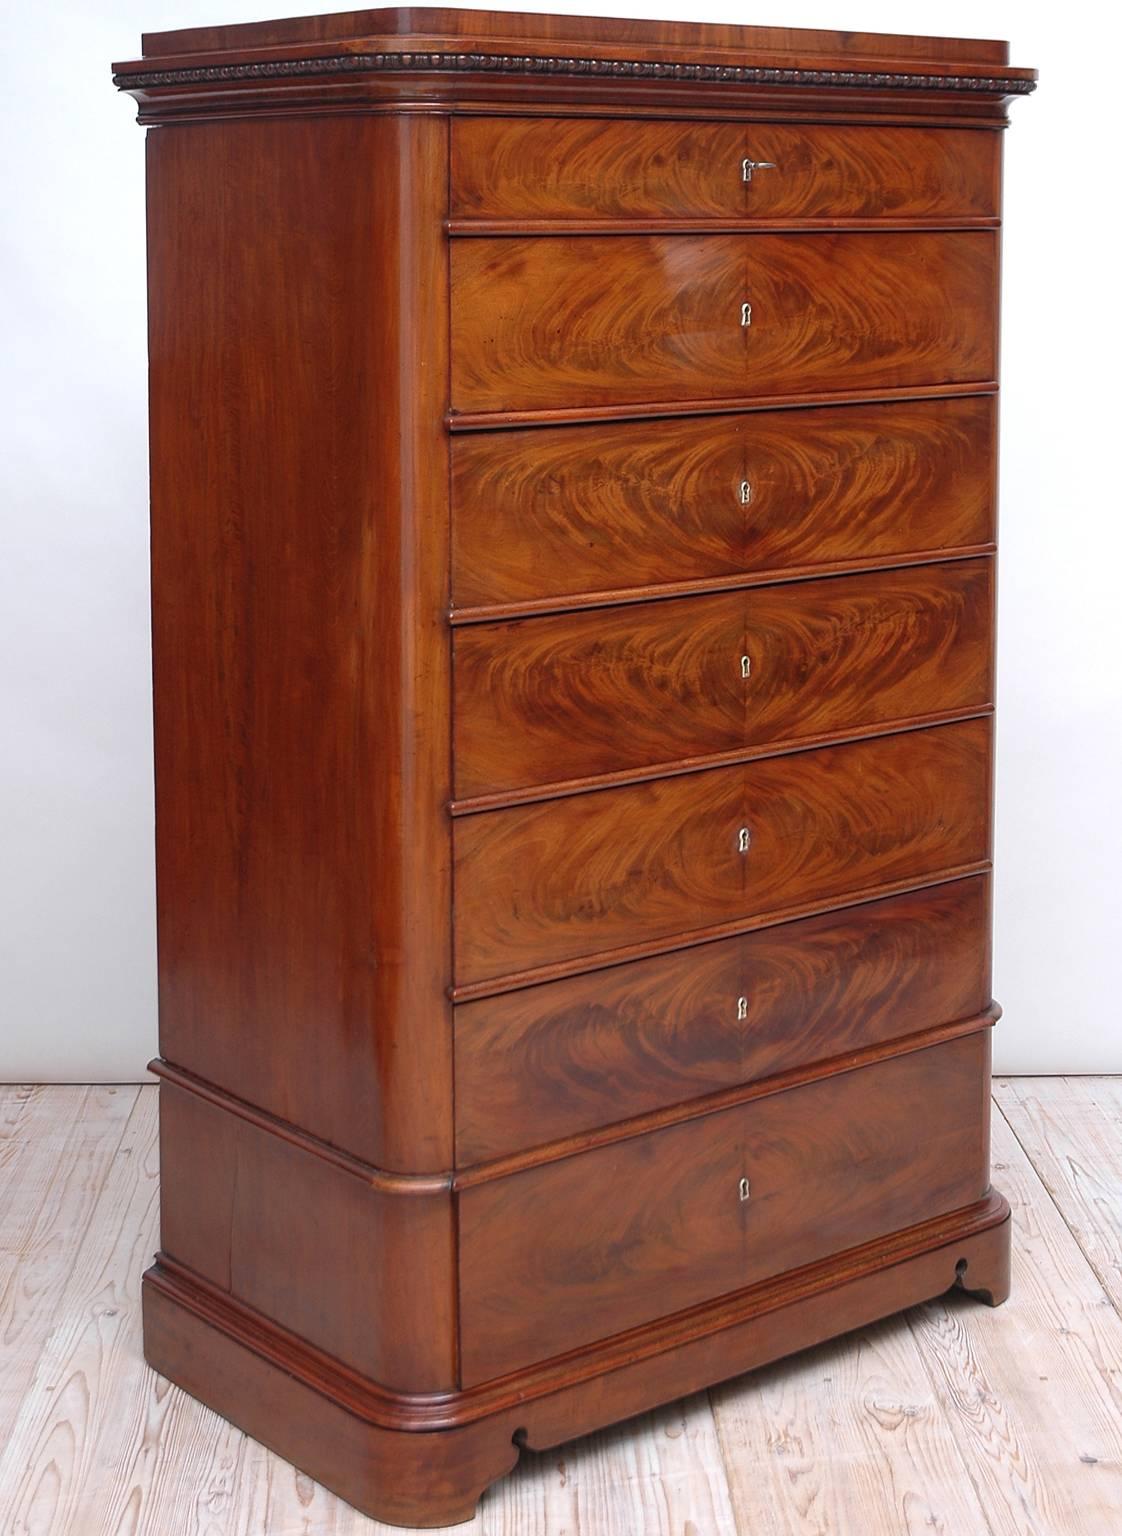 A Biedermeier or Christian VIII semainier or tall chest with seven drawers in mahogany, with bookmatched crotch-mahogany veneer on drawer fronts, pedestal top and plinth base, Denmark, circa 1840.
Offers all original brass key escutcheon plates and